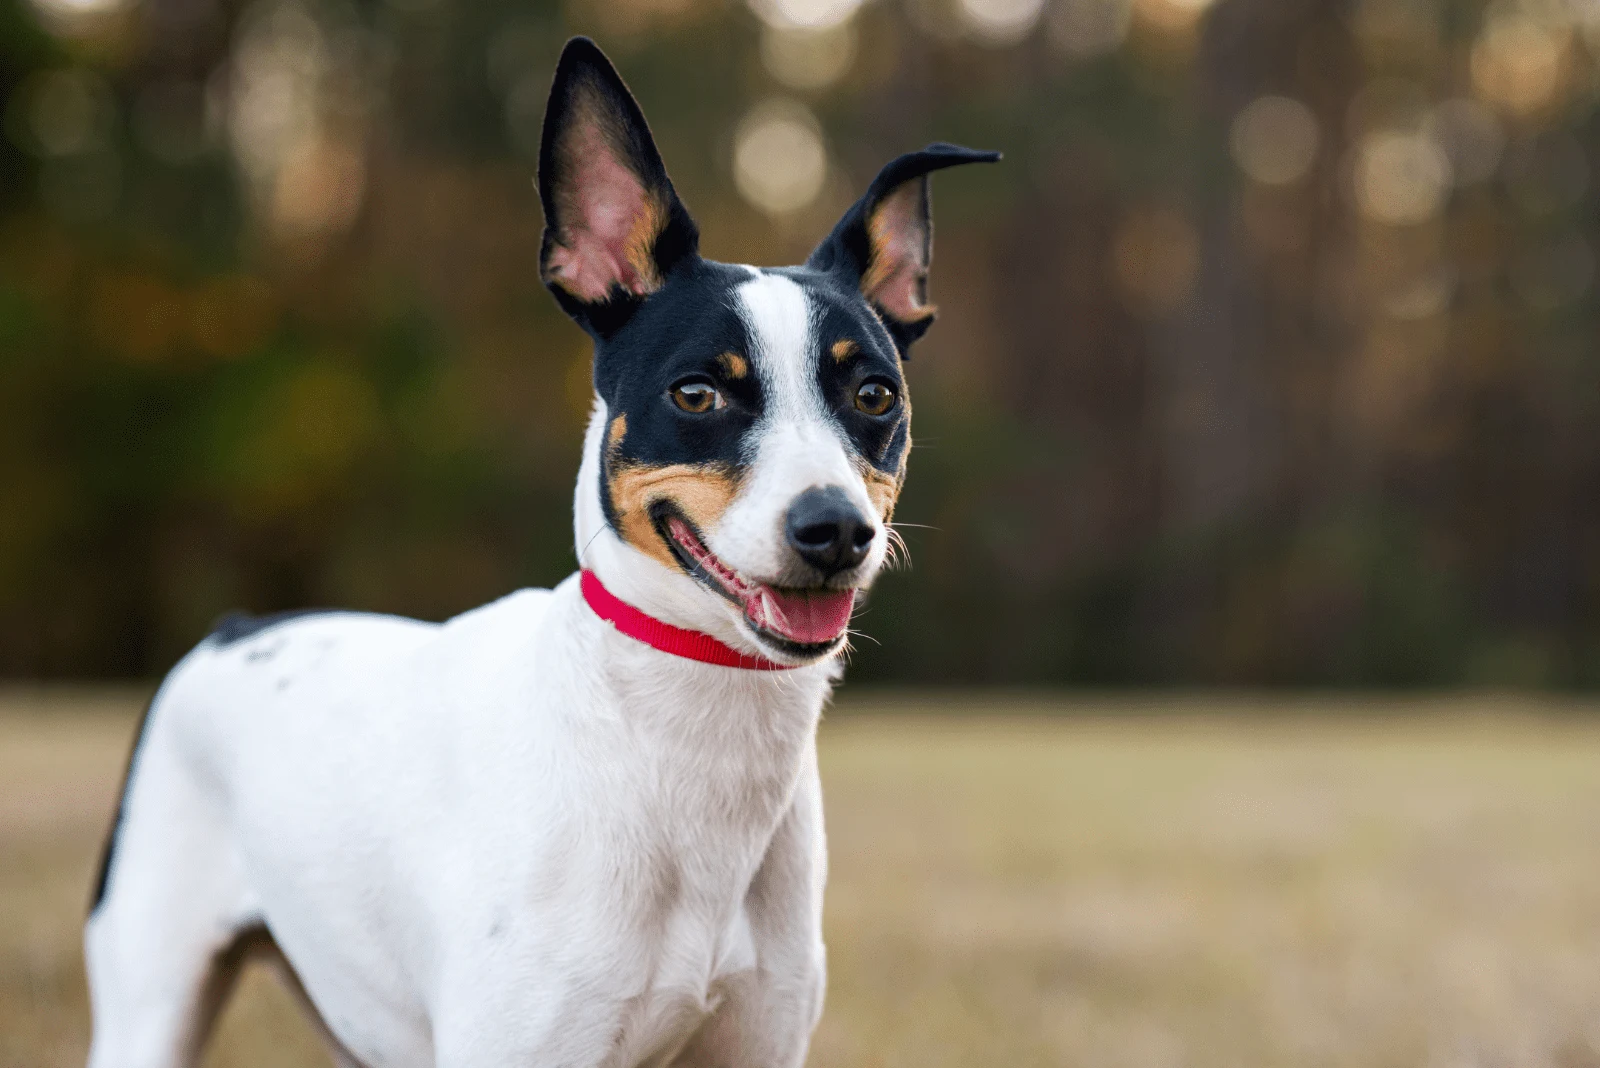 Rat Terrier stands and looks at the camera